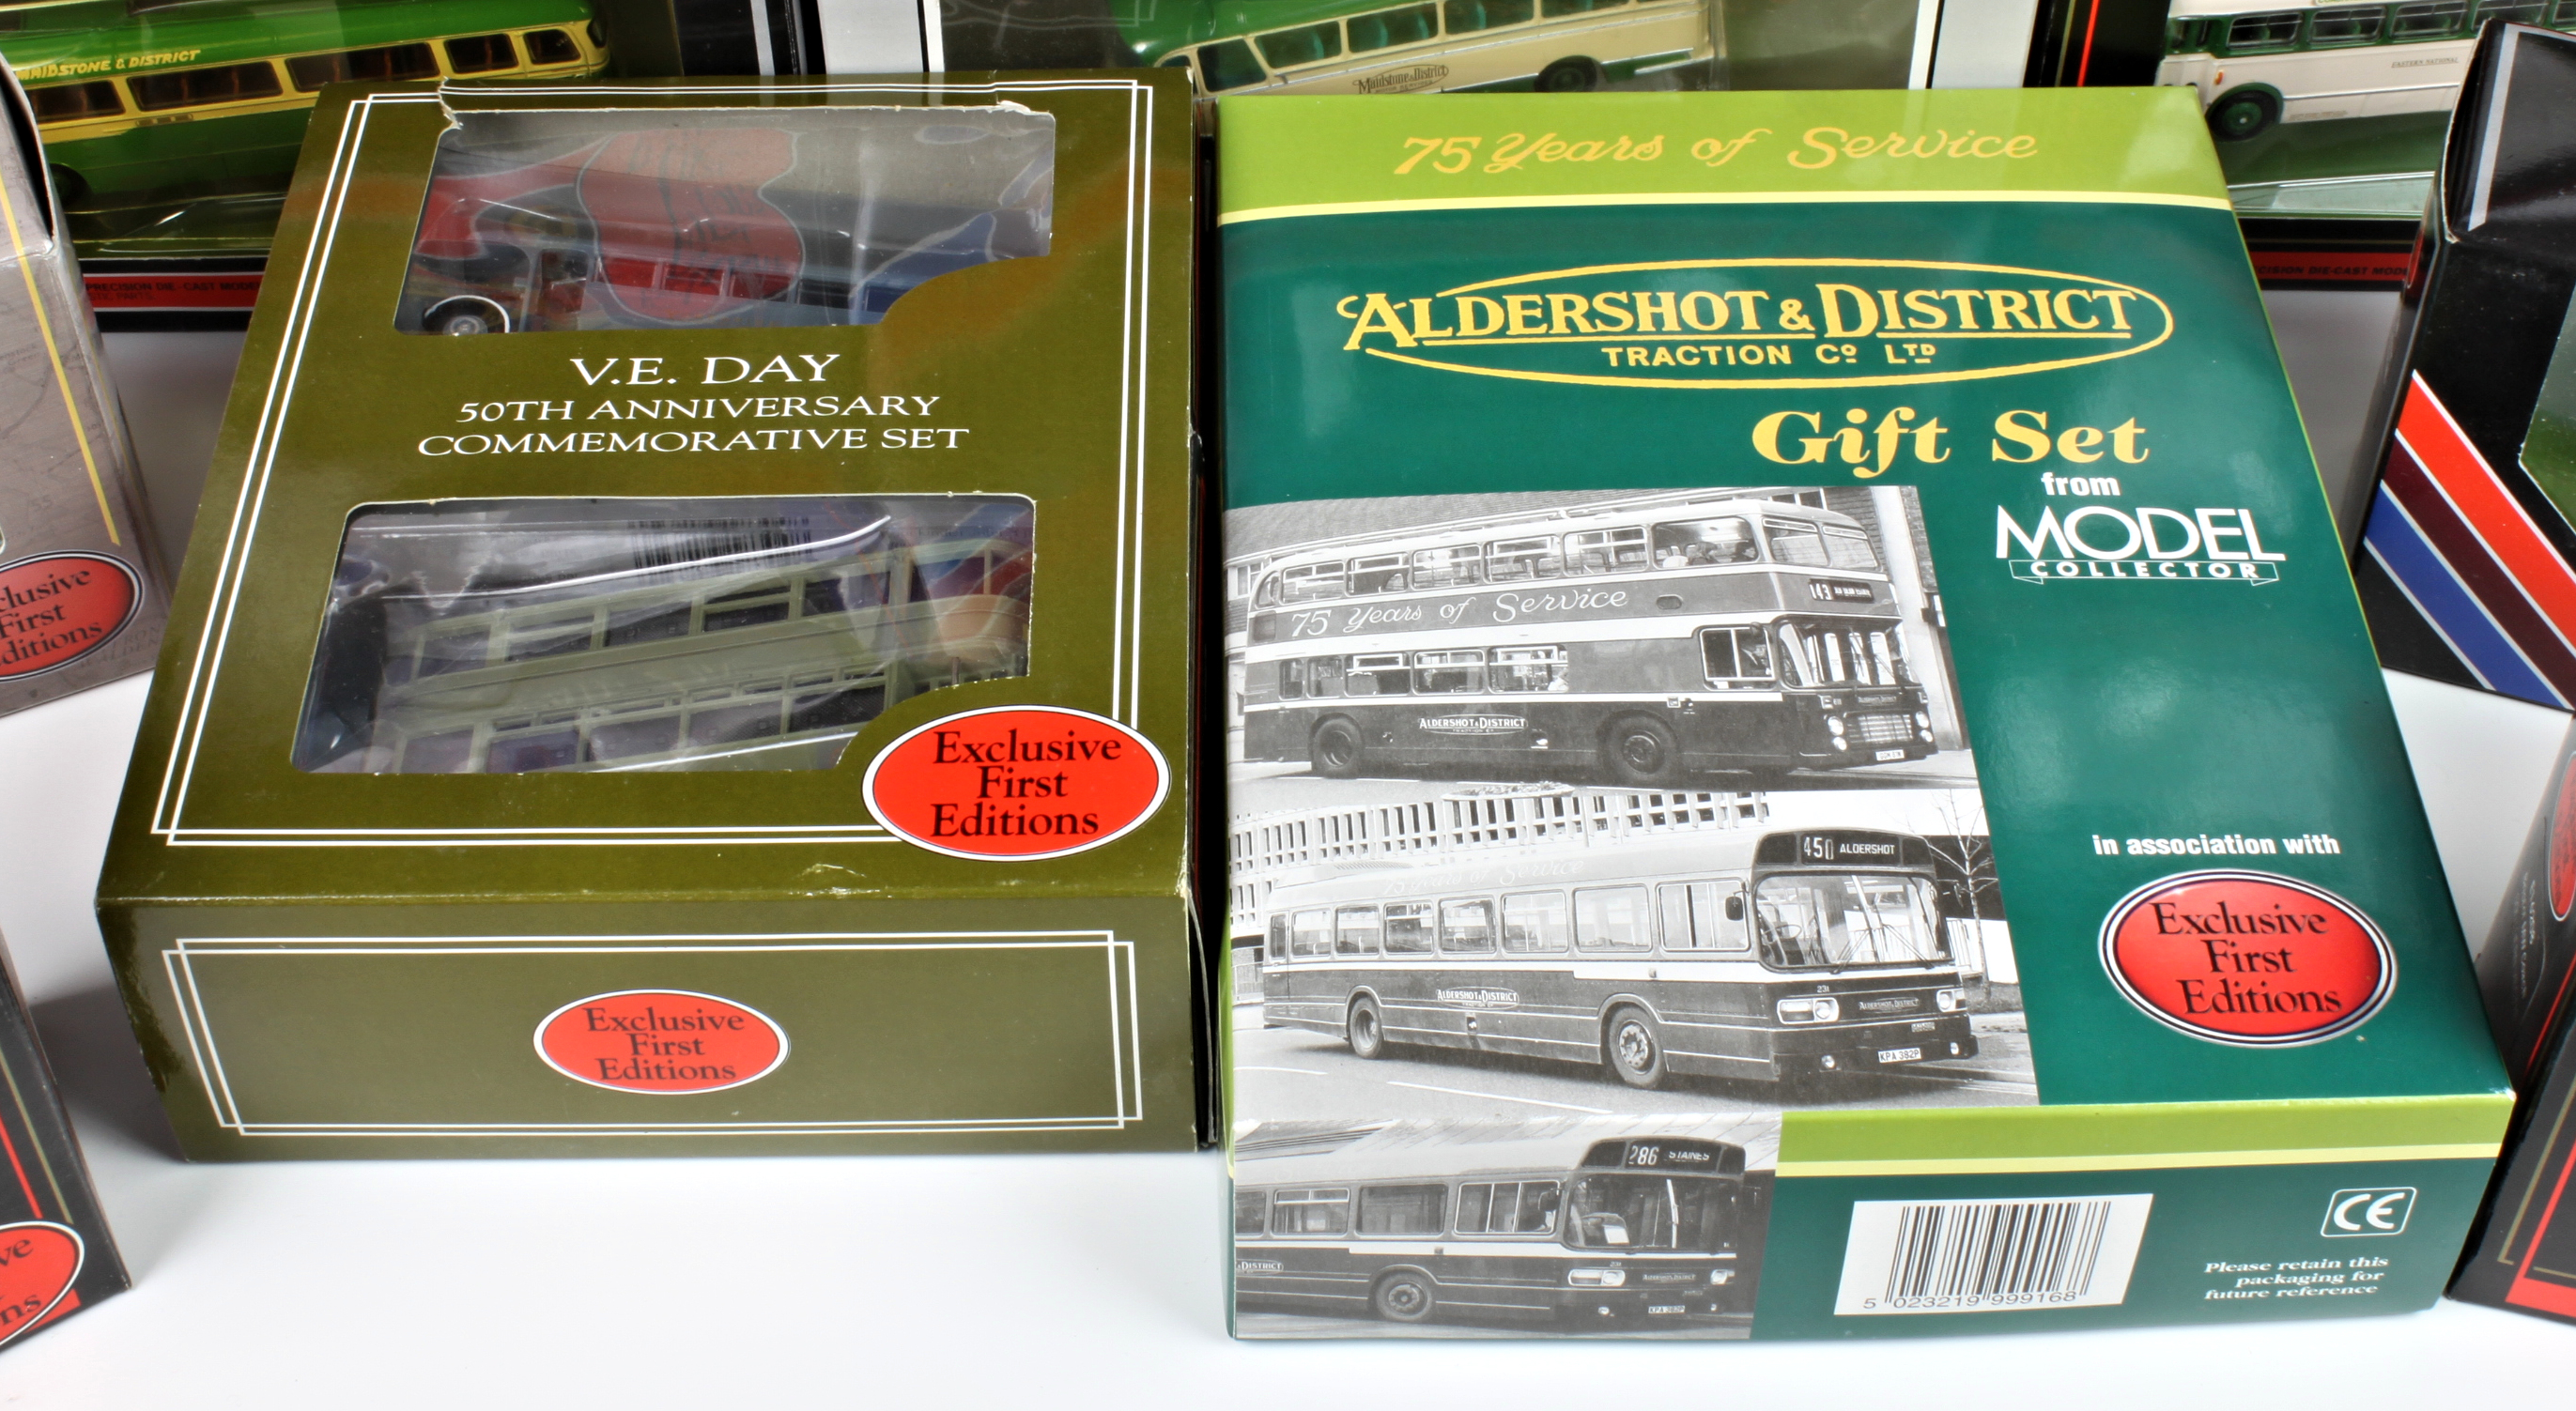 Exclusive First Editions - Twenty four boxed diecast Buses, to include The Rank Hovis Story & The R. - Image 2 of 4